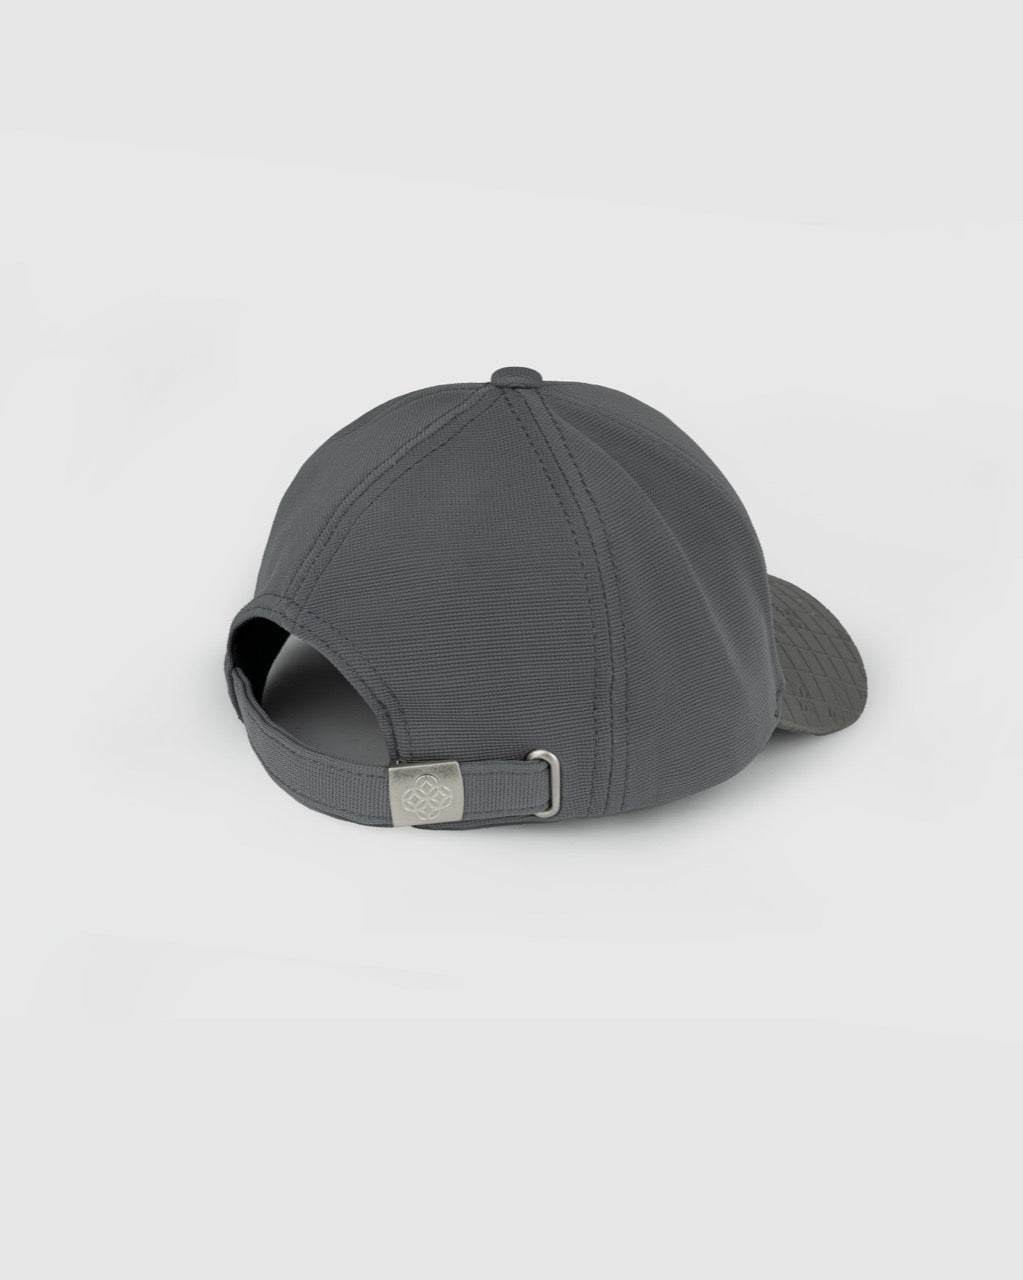 First Sight Leather Visor Cap